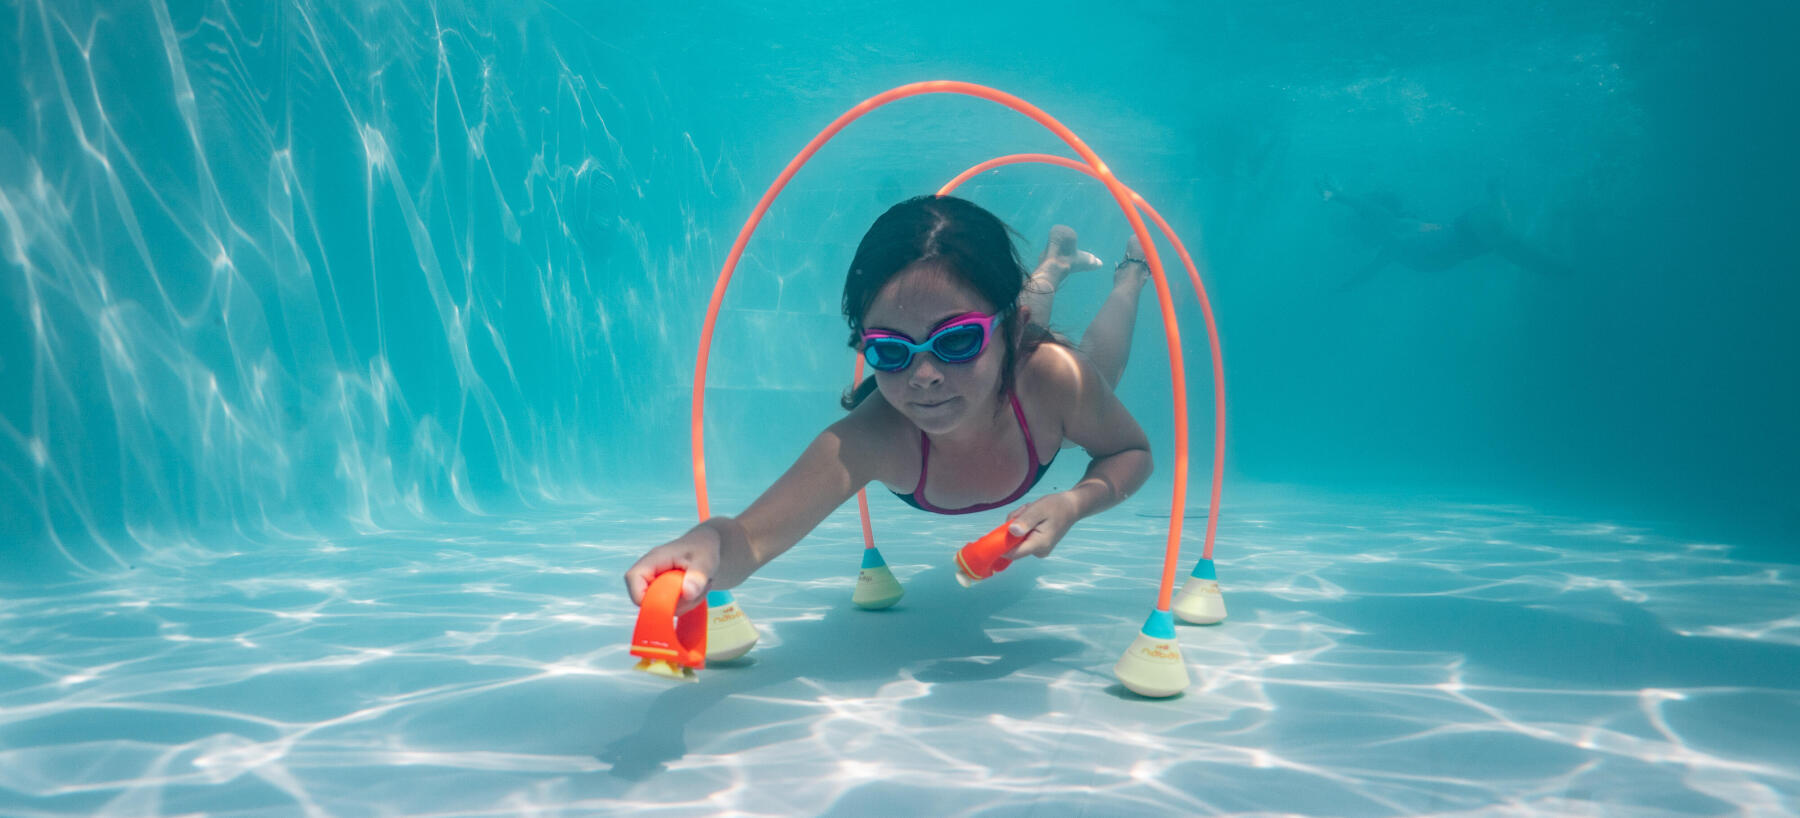 How can I help my child to learn to swim?